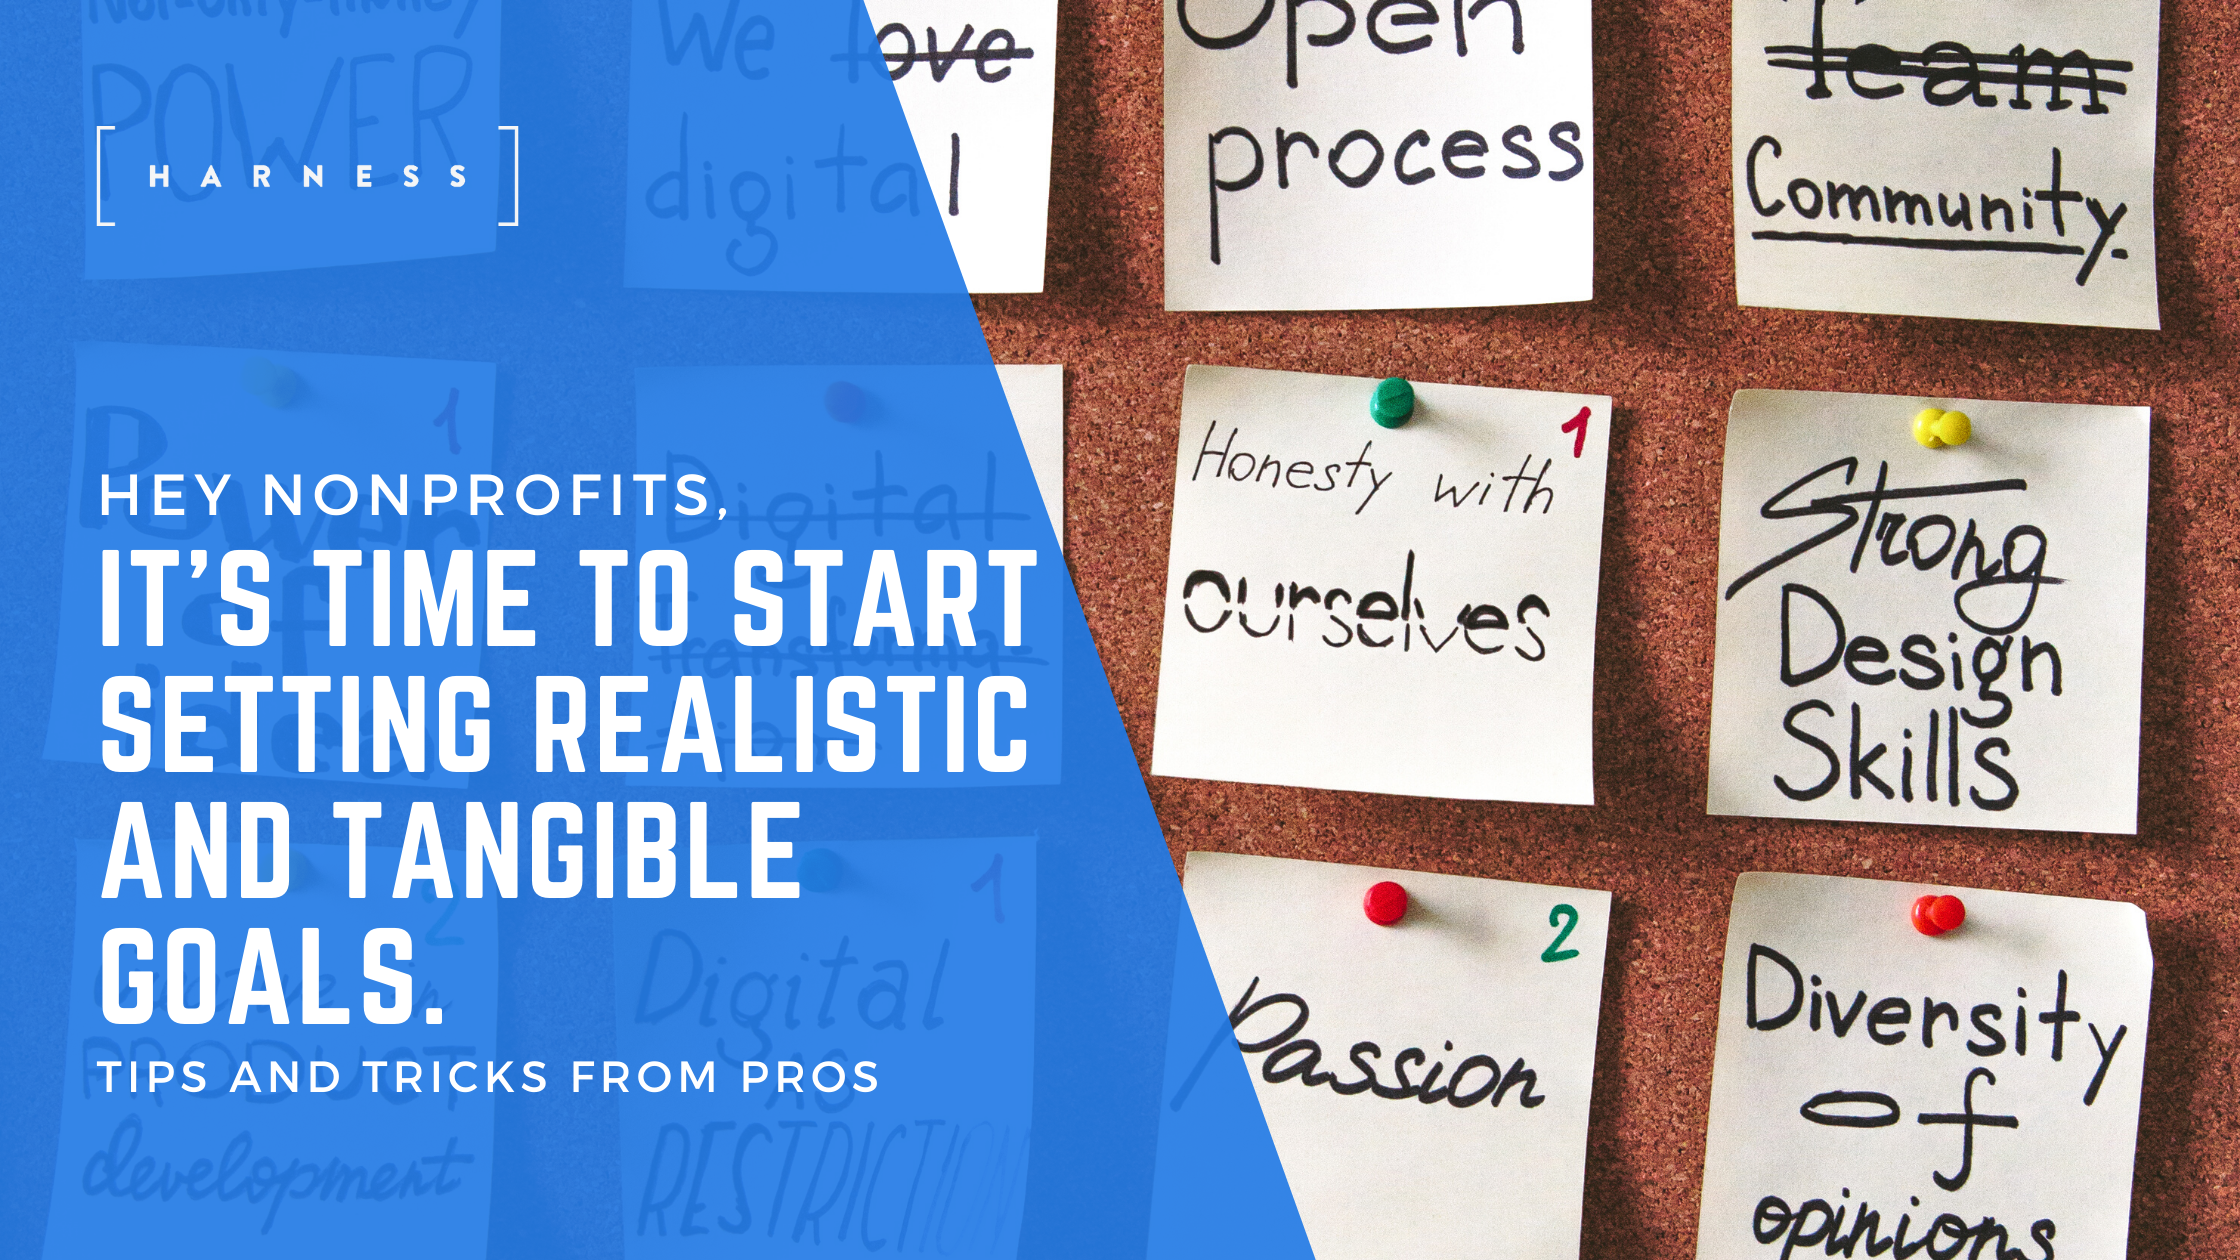 Hey nonprofits, it's time to start setting realistic and tangible goals